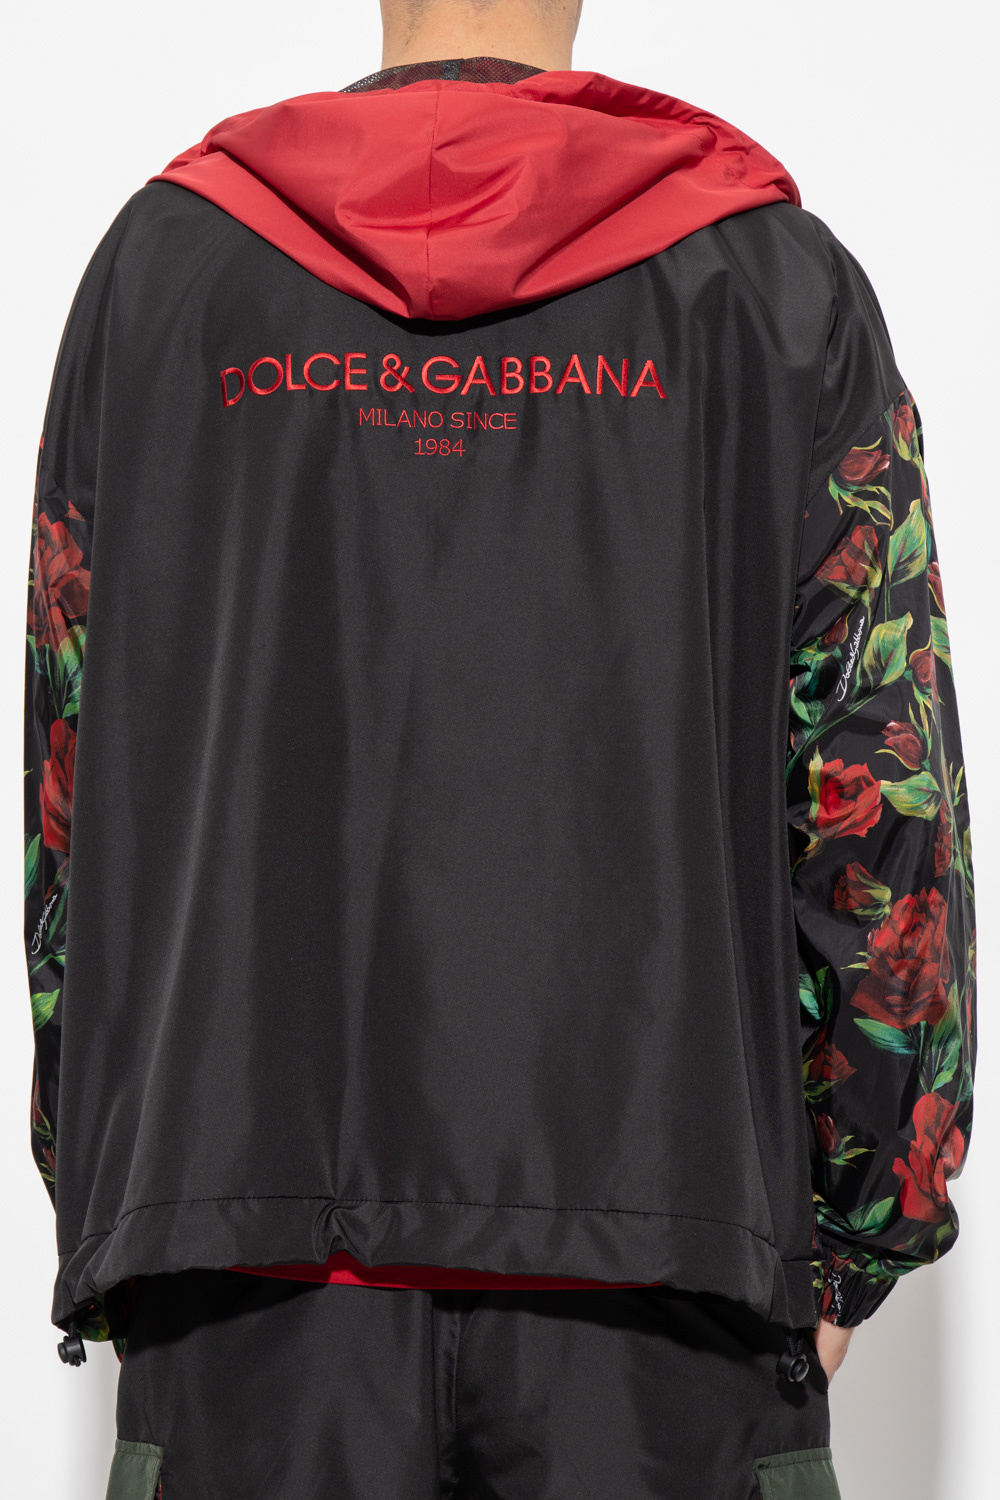 100% Authentic Dolce & Gabbana D&G Pants Hooded jacket